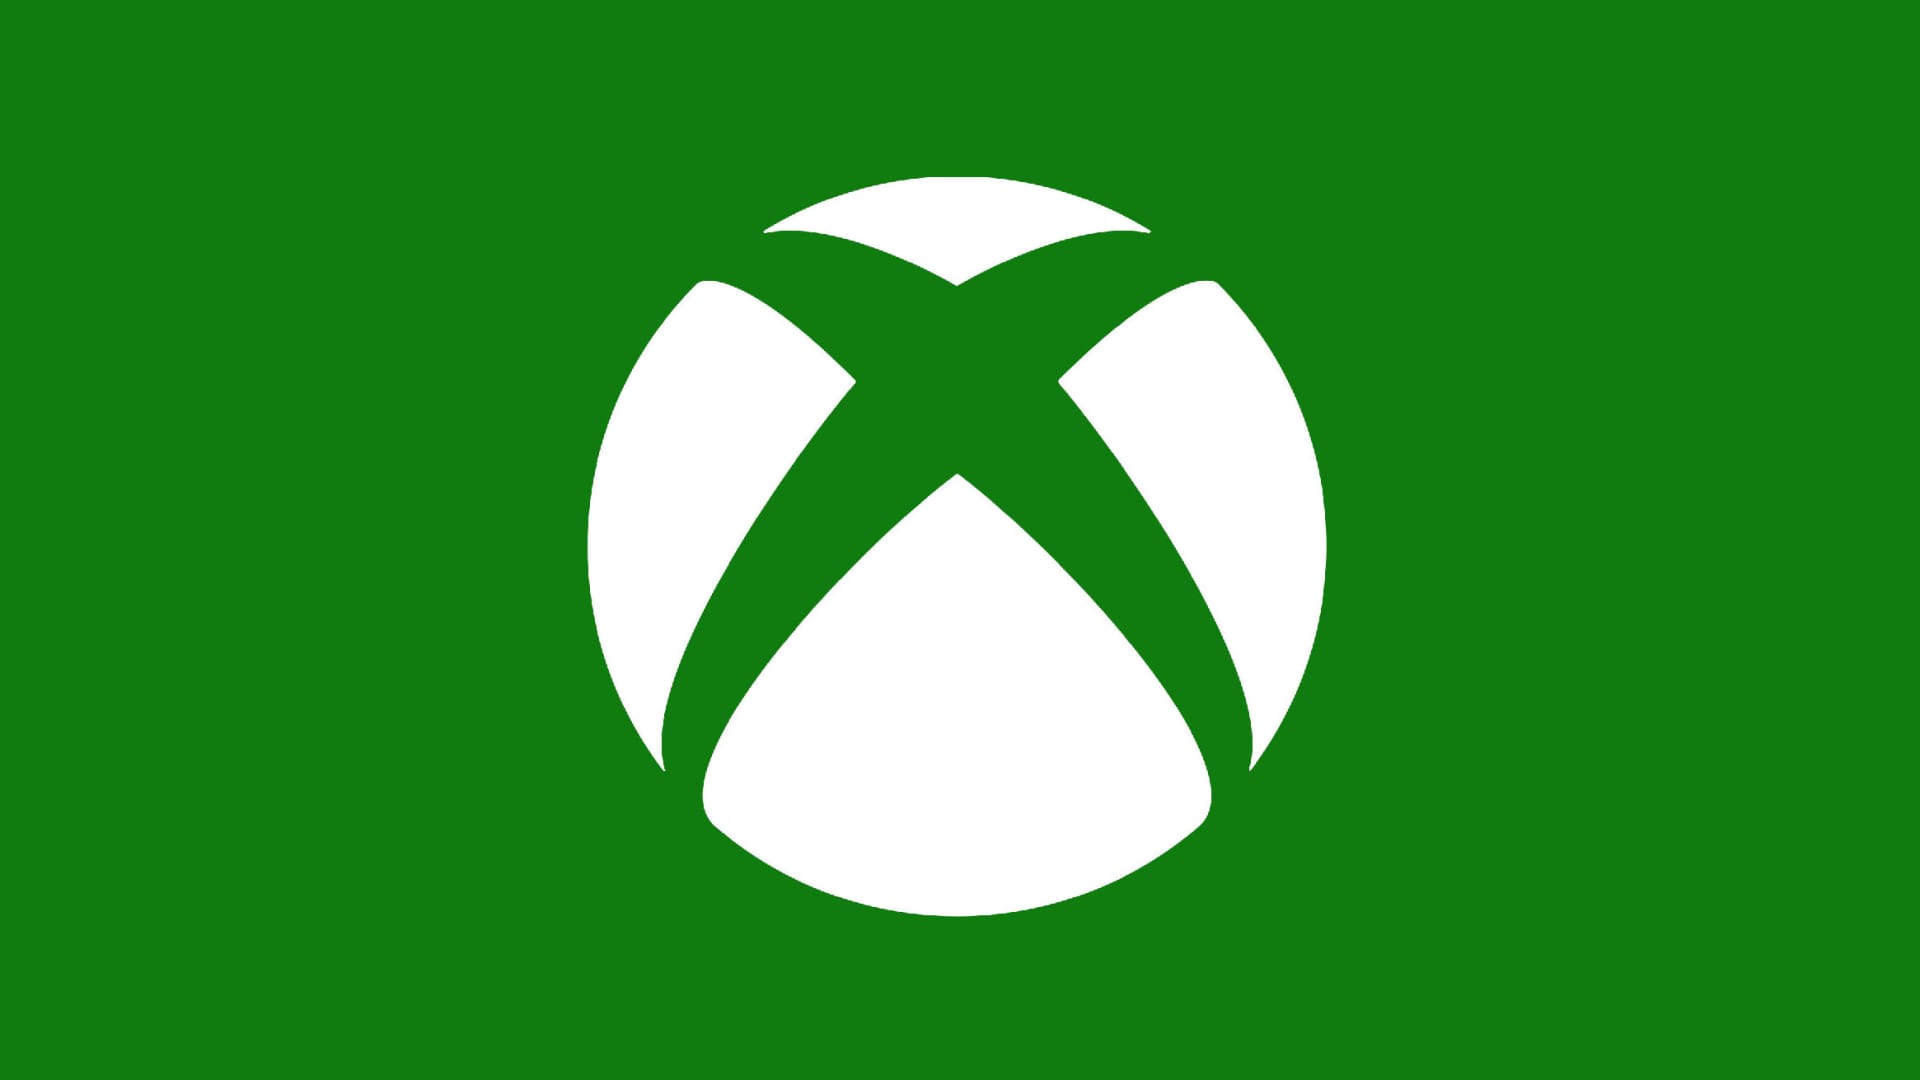 Microsoft Will Share Its “Vision for the Future of Xbox” at an Event Next Week